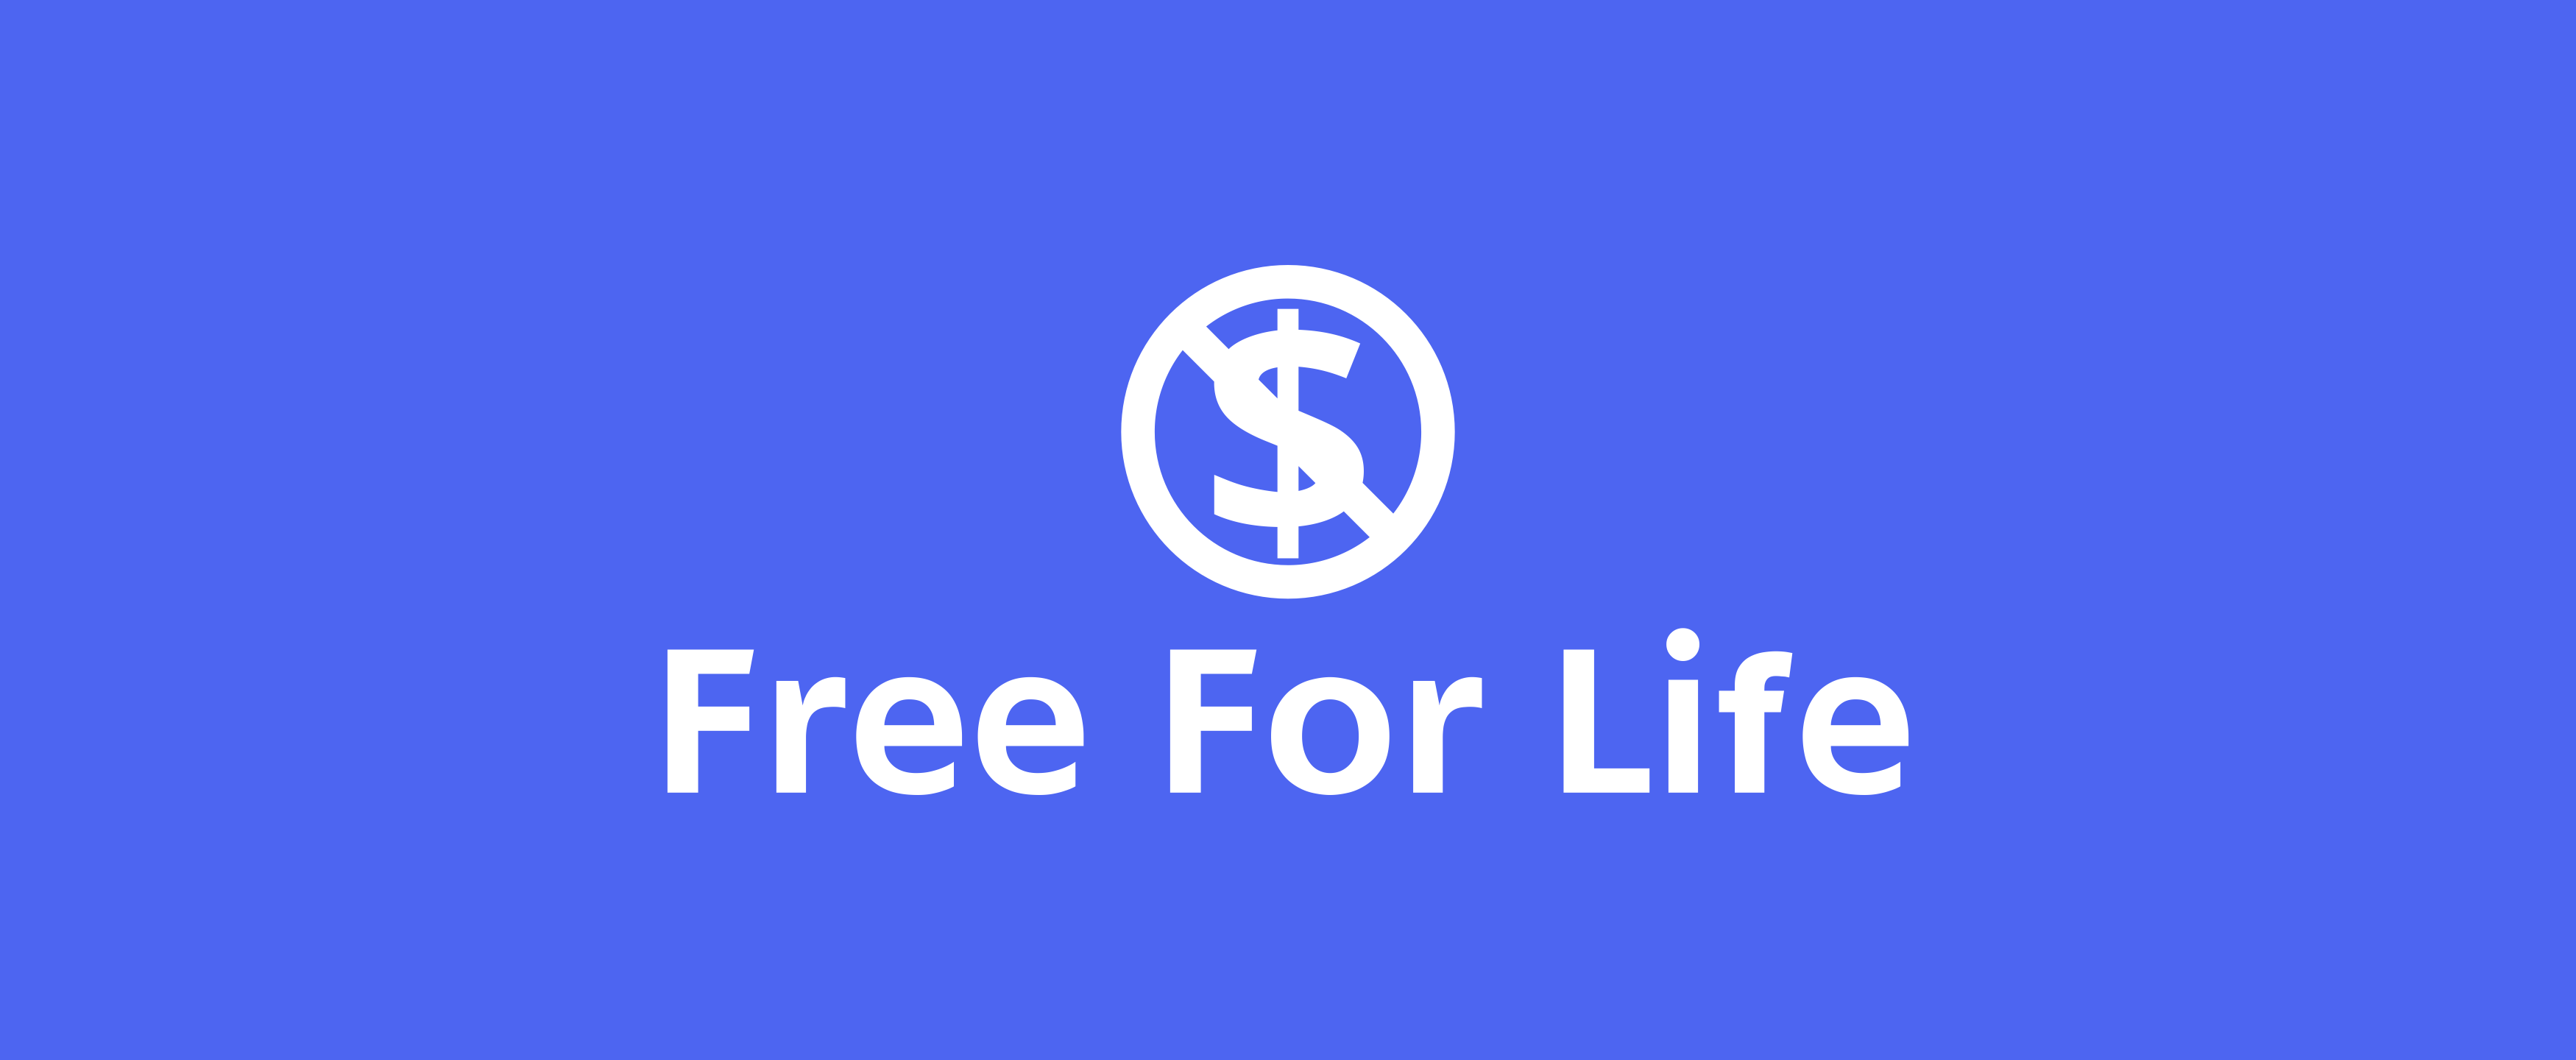 Free For Life